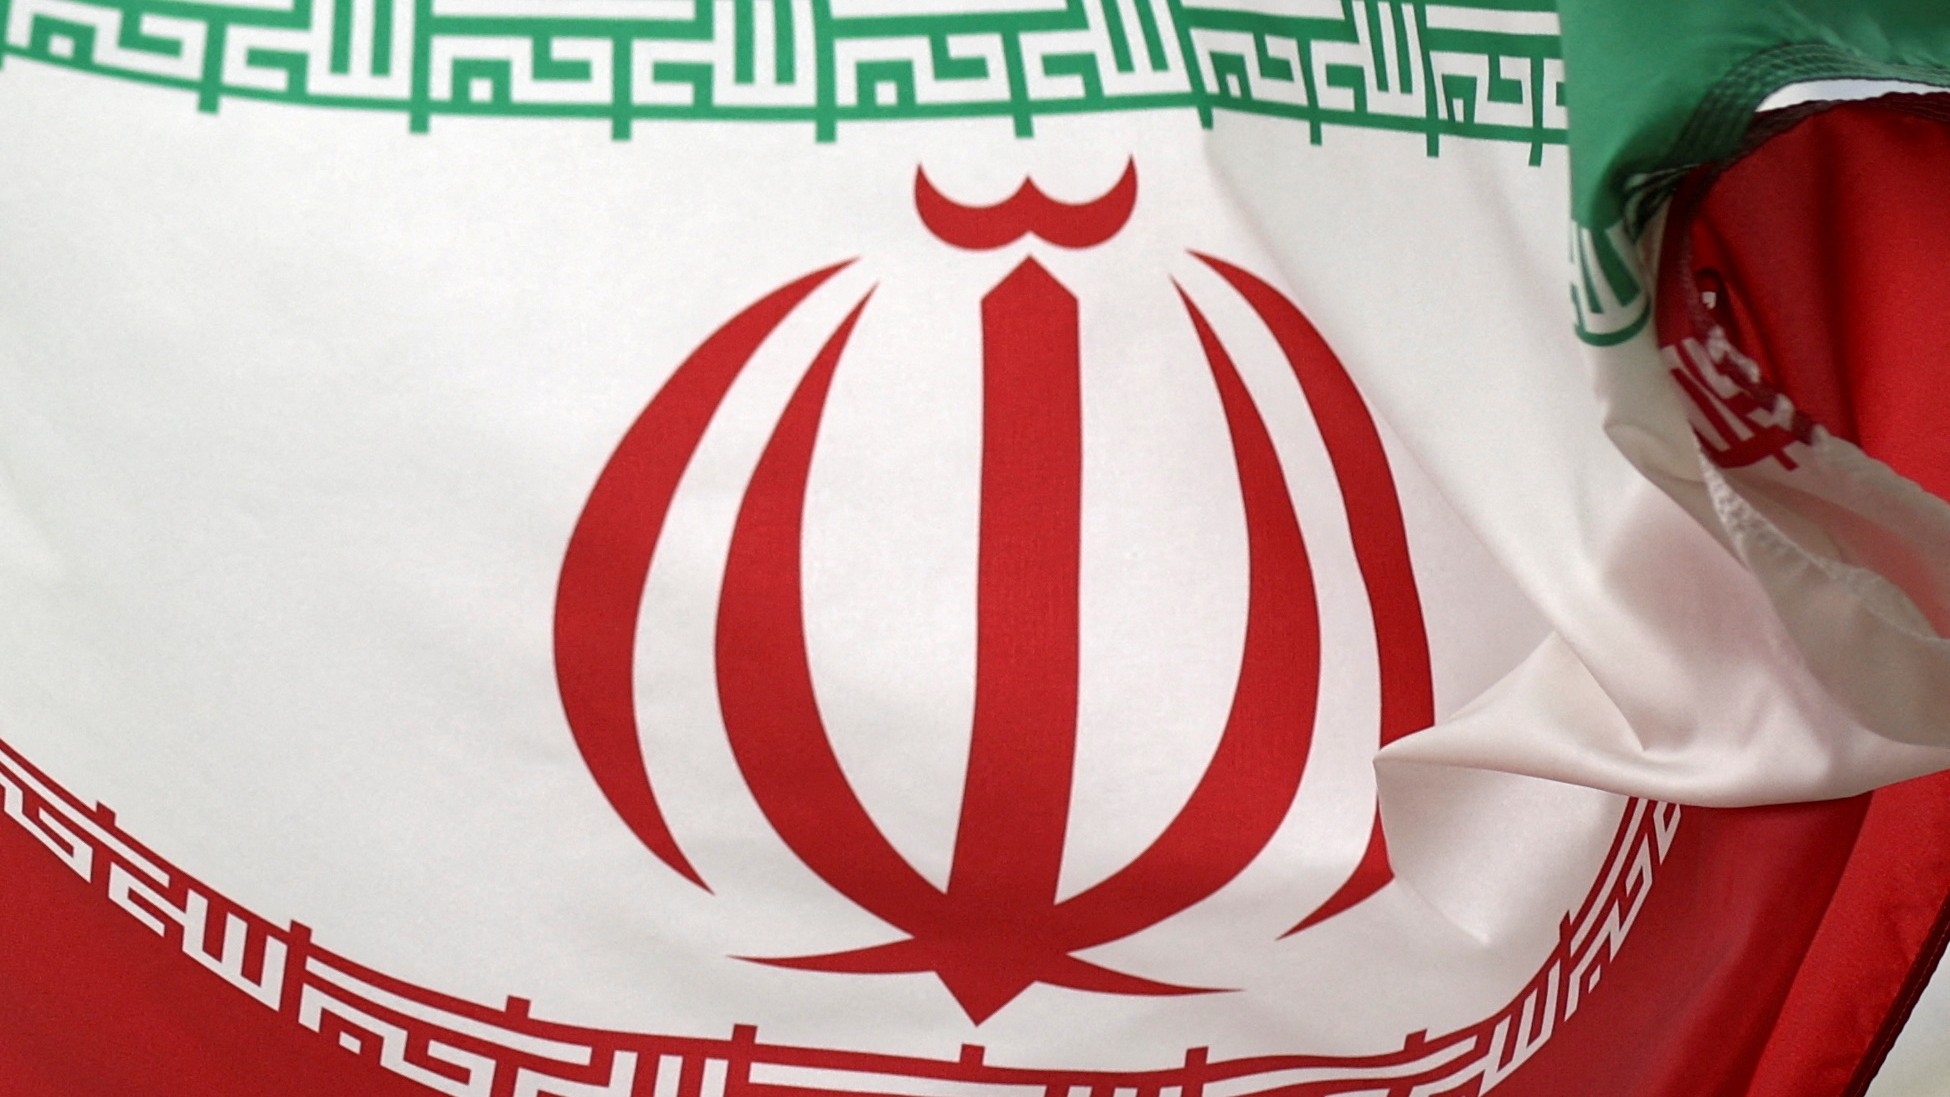 An eighth round of indirect talks between the US and Iran began in Vienna in November.